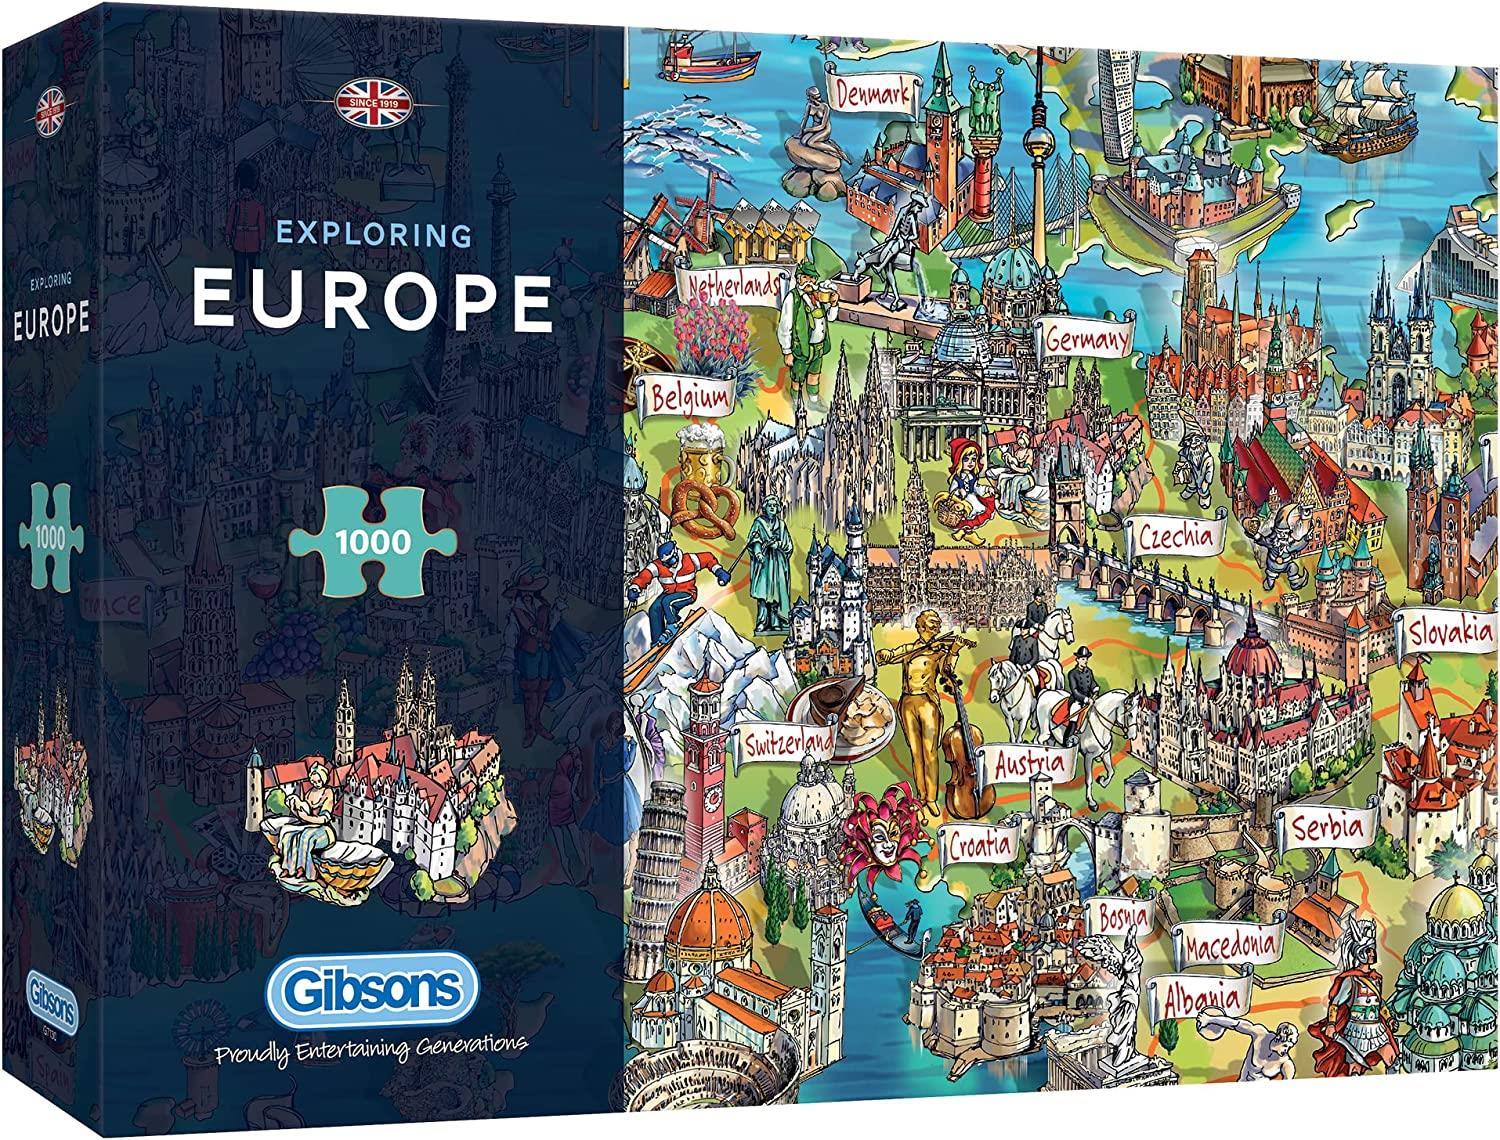 Gibsons Exploring Europe Jigsaw Puzzle (1000 Pieces) – PDK